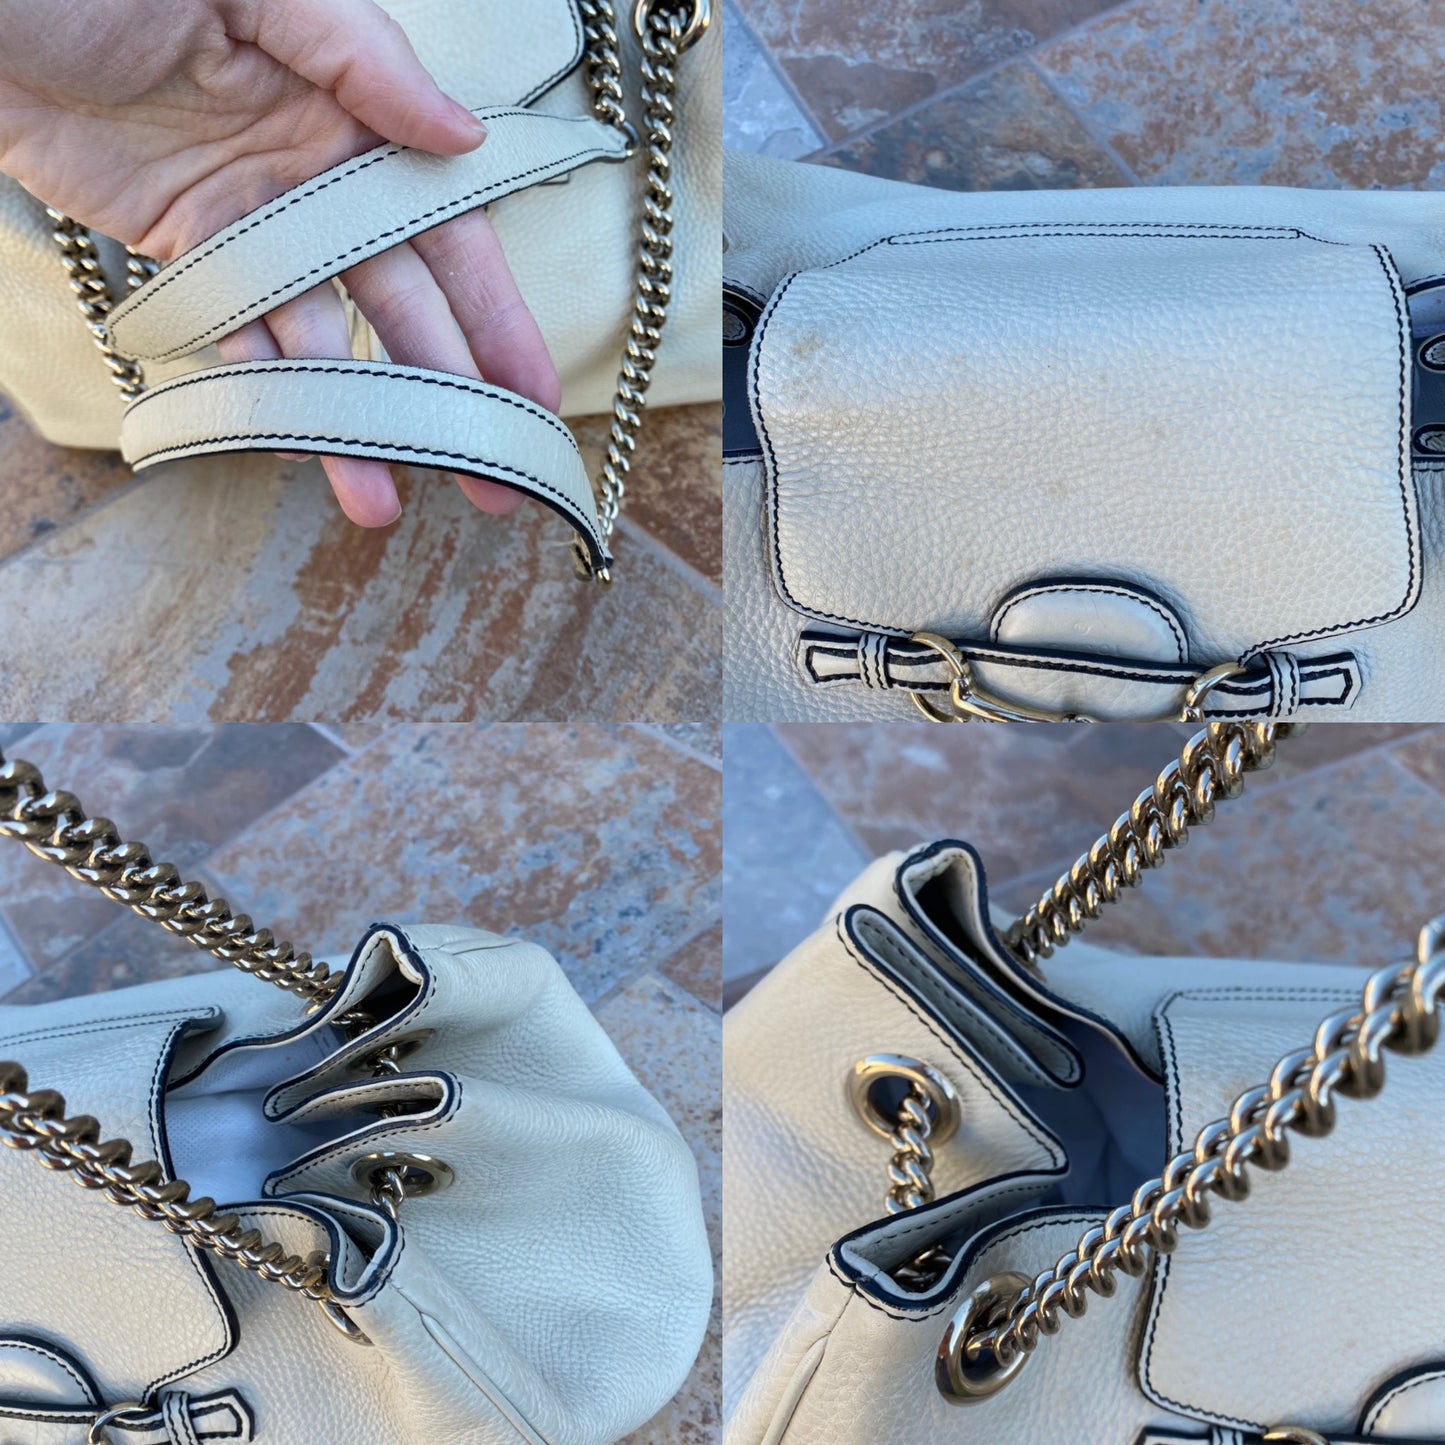 Gucci Pebbled Leather Emily Chain Shoulder Bag